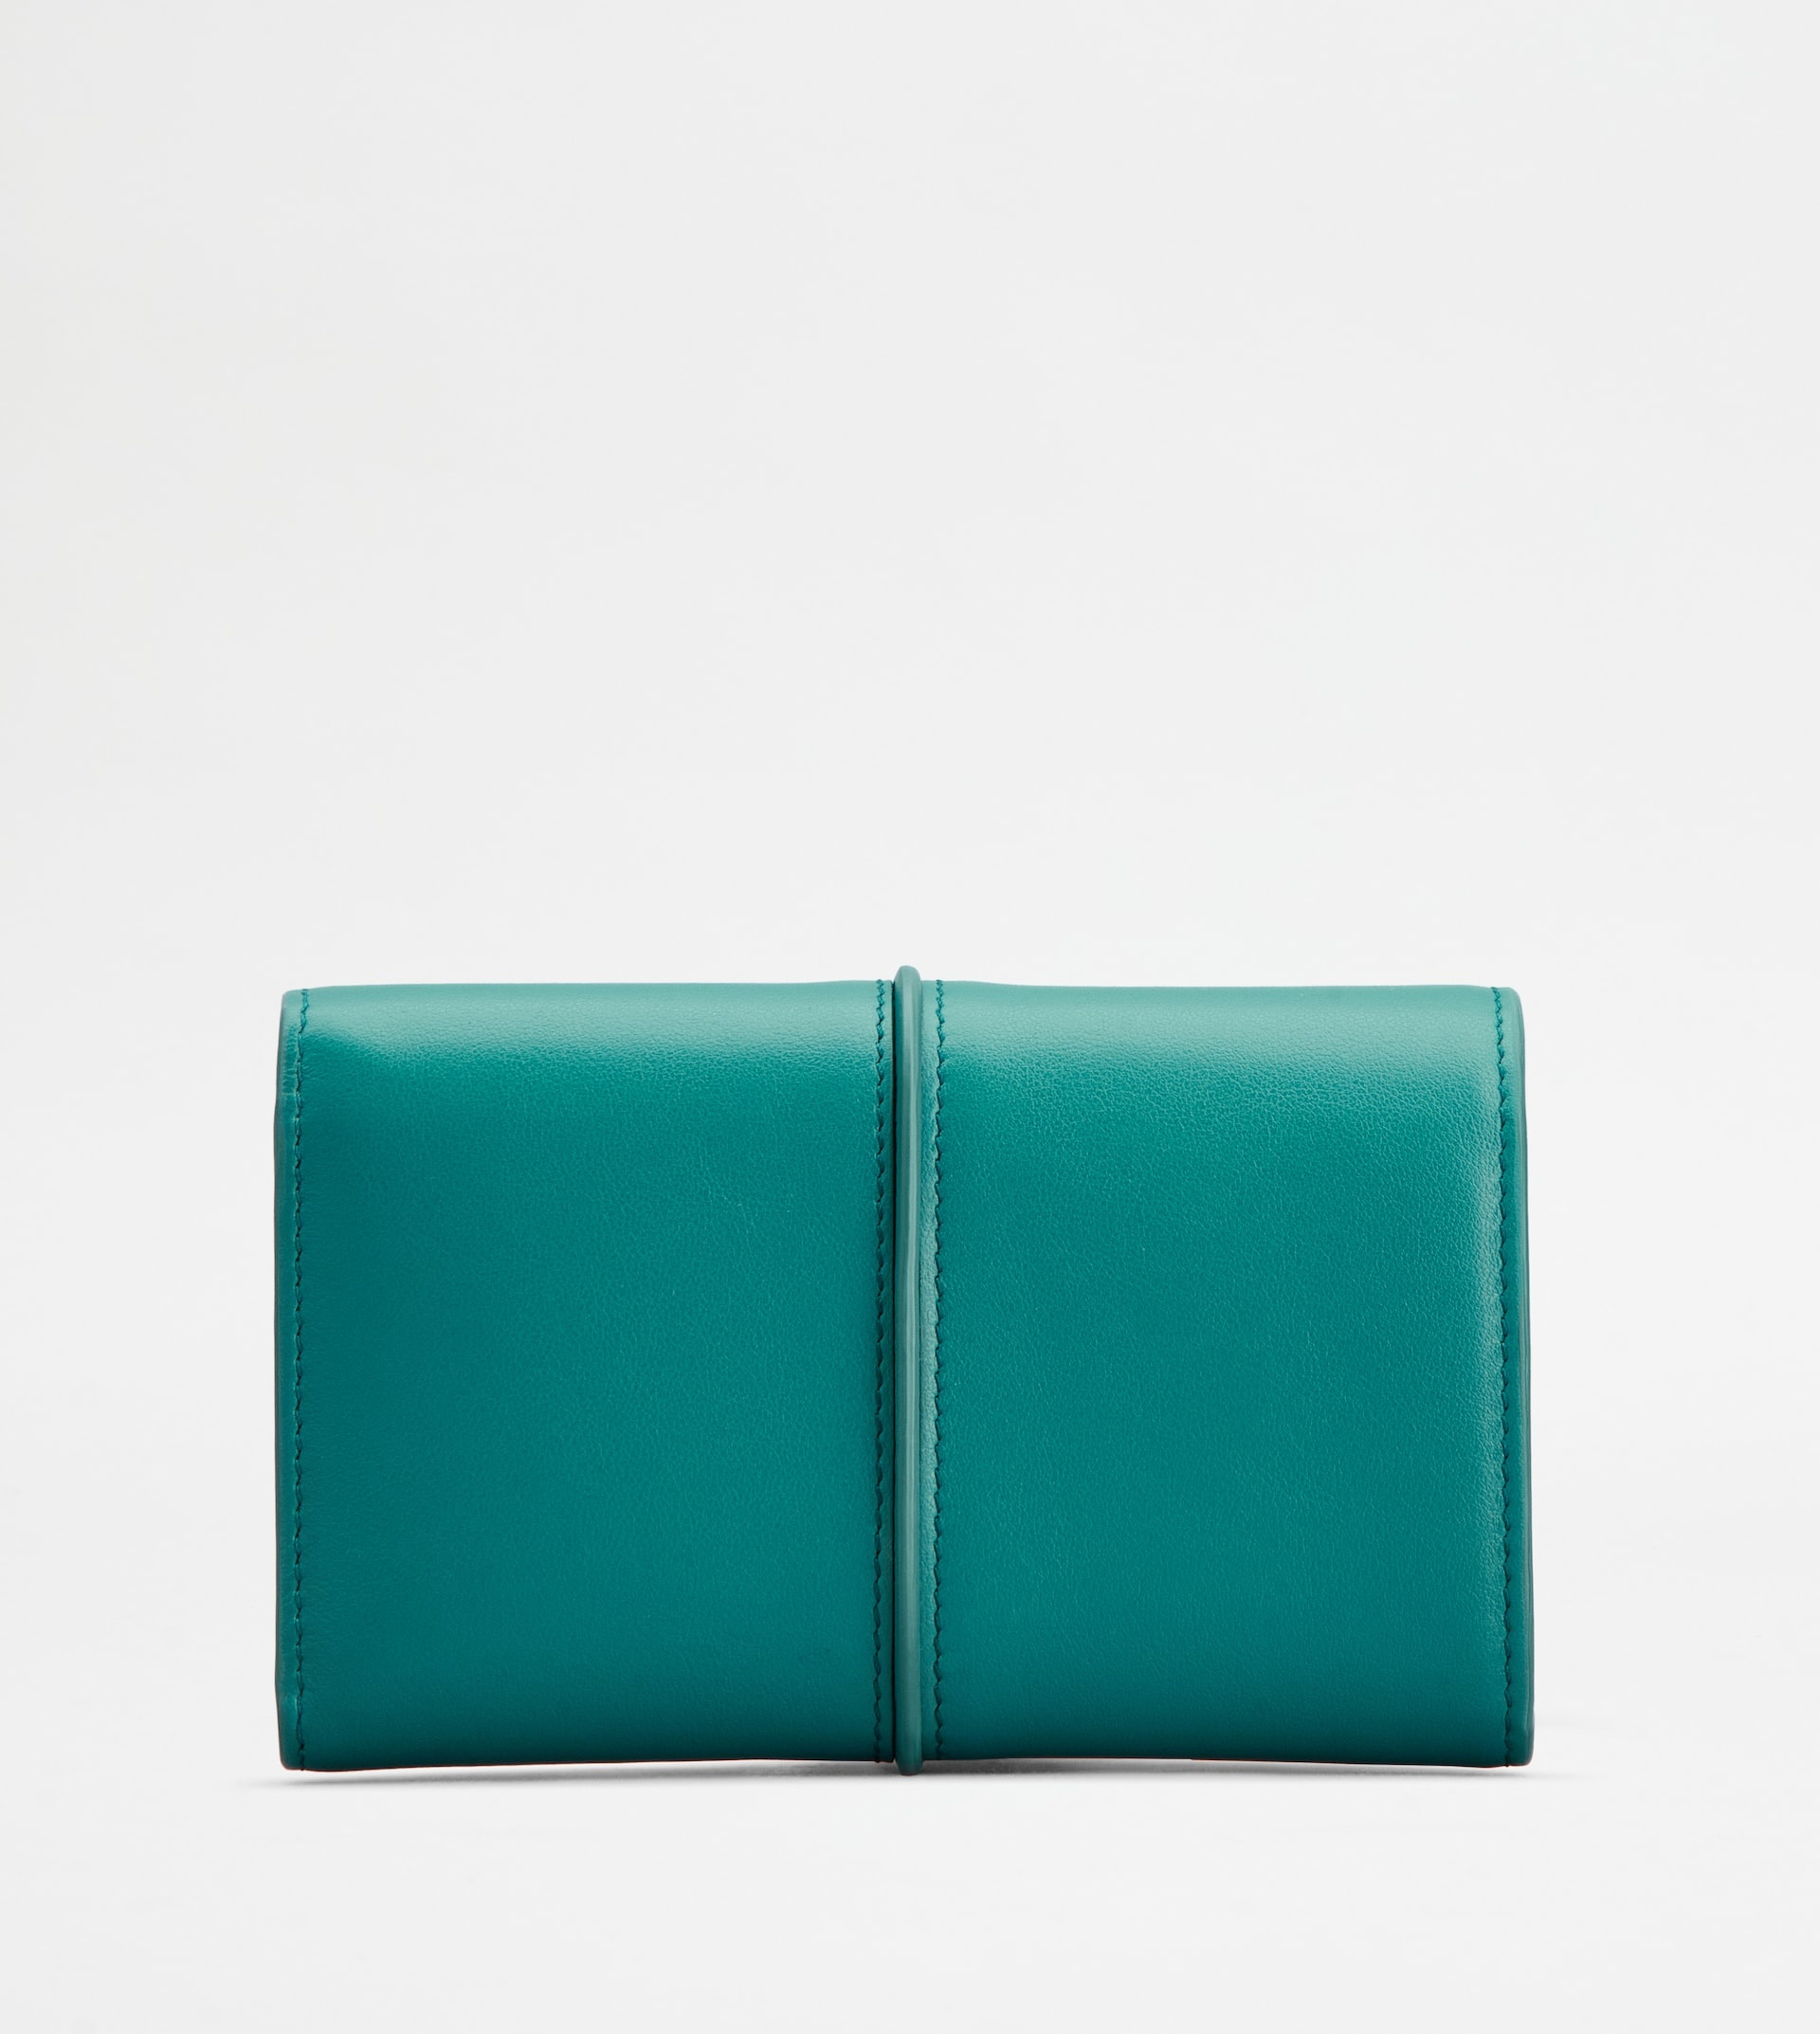 T TIMELESS WALLET IN LEATHER - GREEN - 3